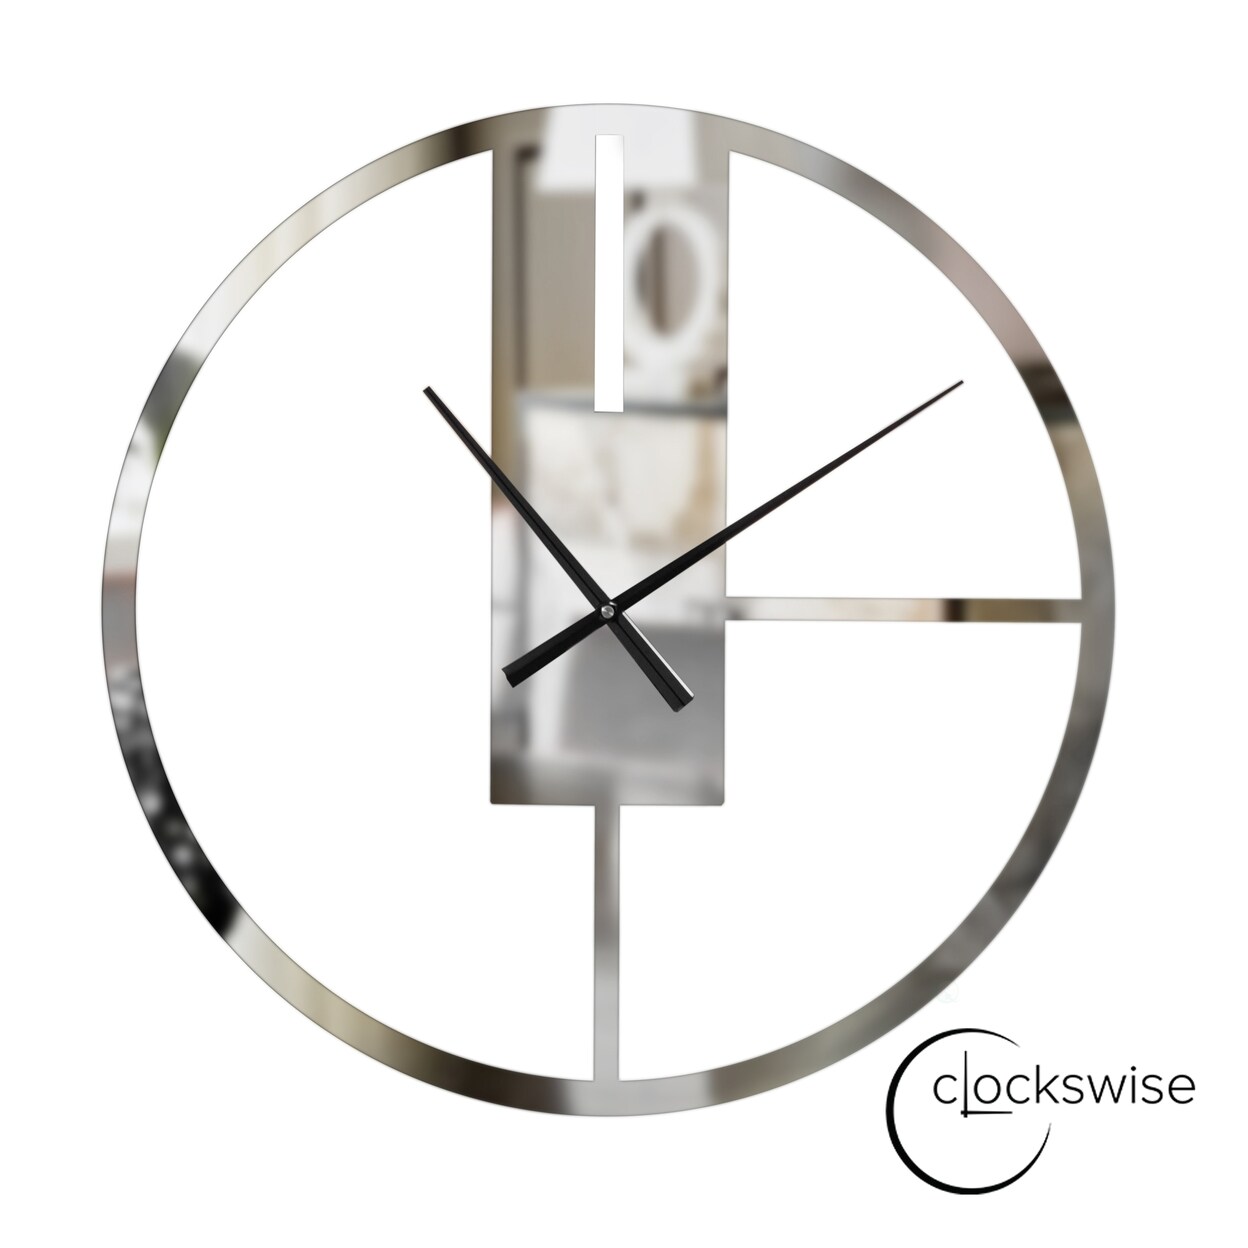 Clockswise Modern Round Big Wall Clock with Mirror Face Decorative Silver Metal 22.75 Oversize Timepiece for Entryway Office Living